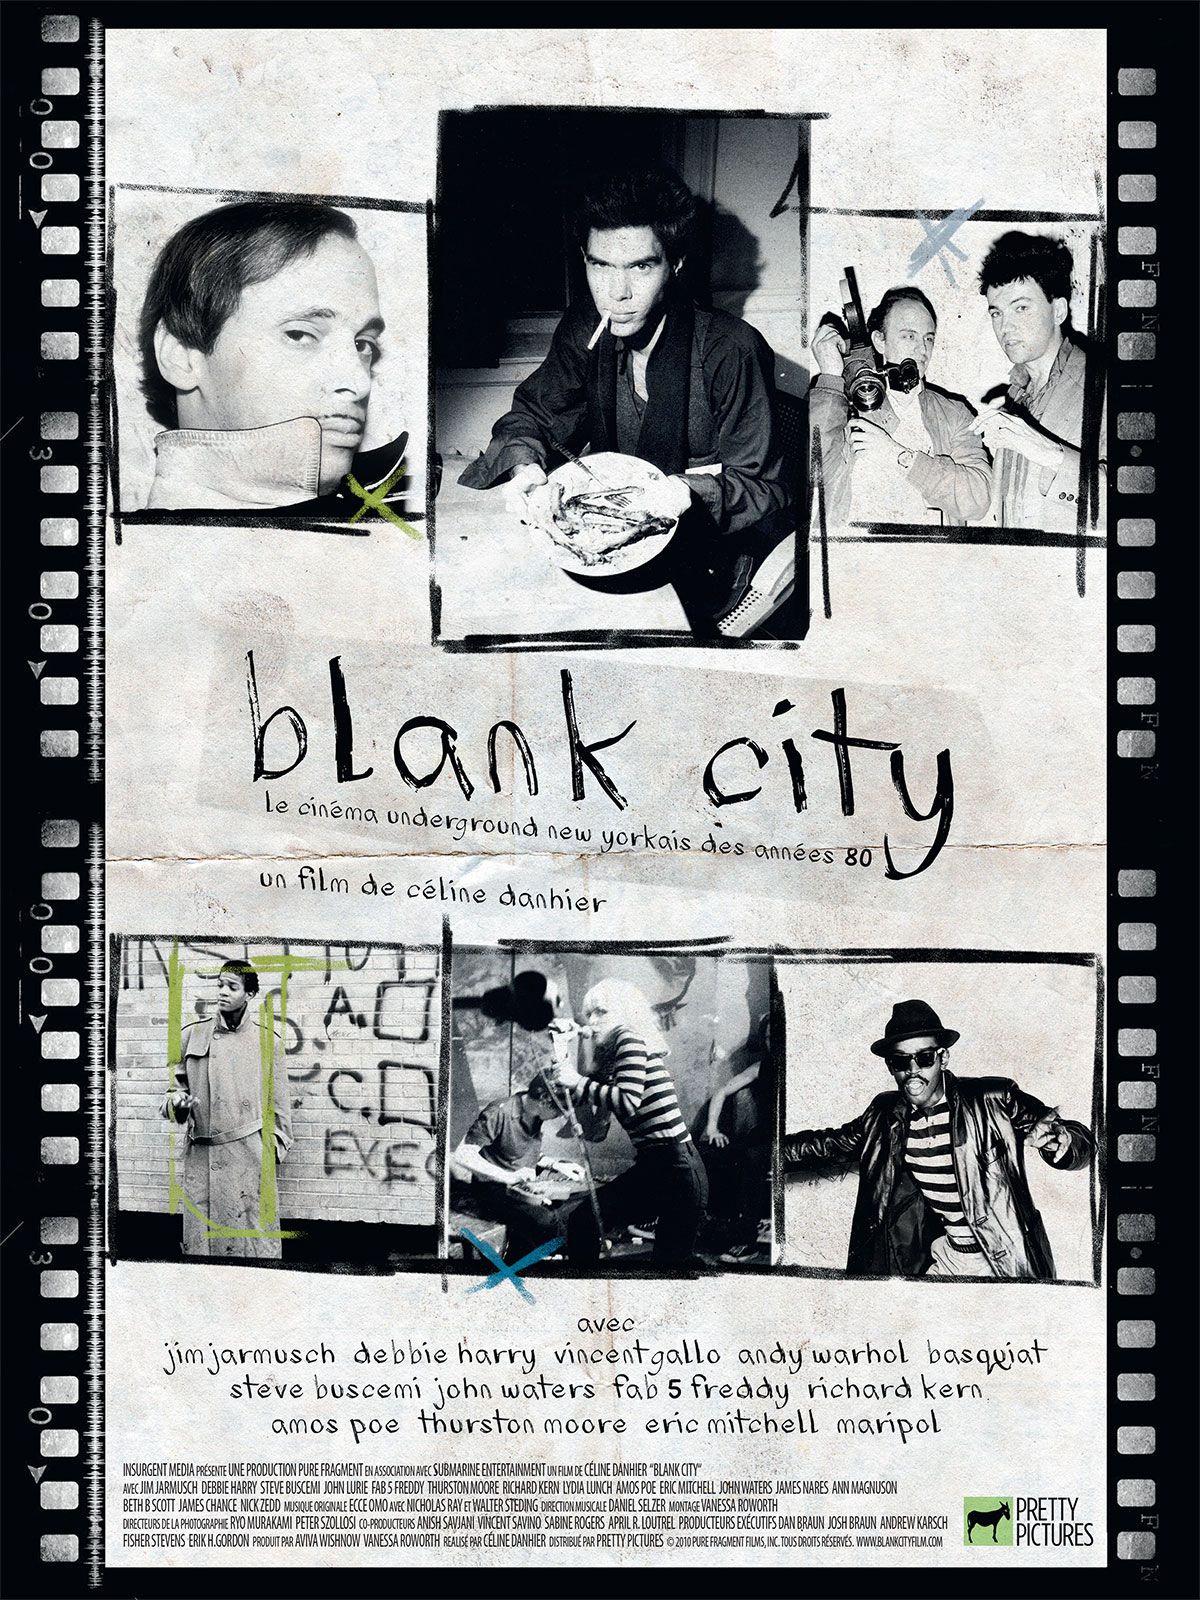 Blank City - Documentaire (2010) streaming VF gratuit complet